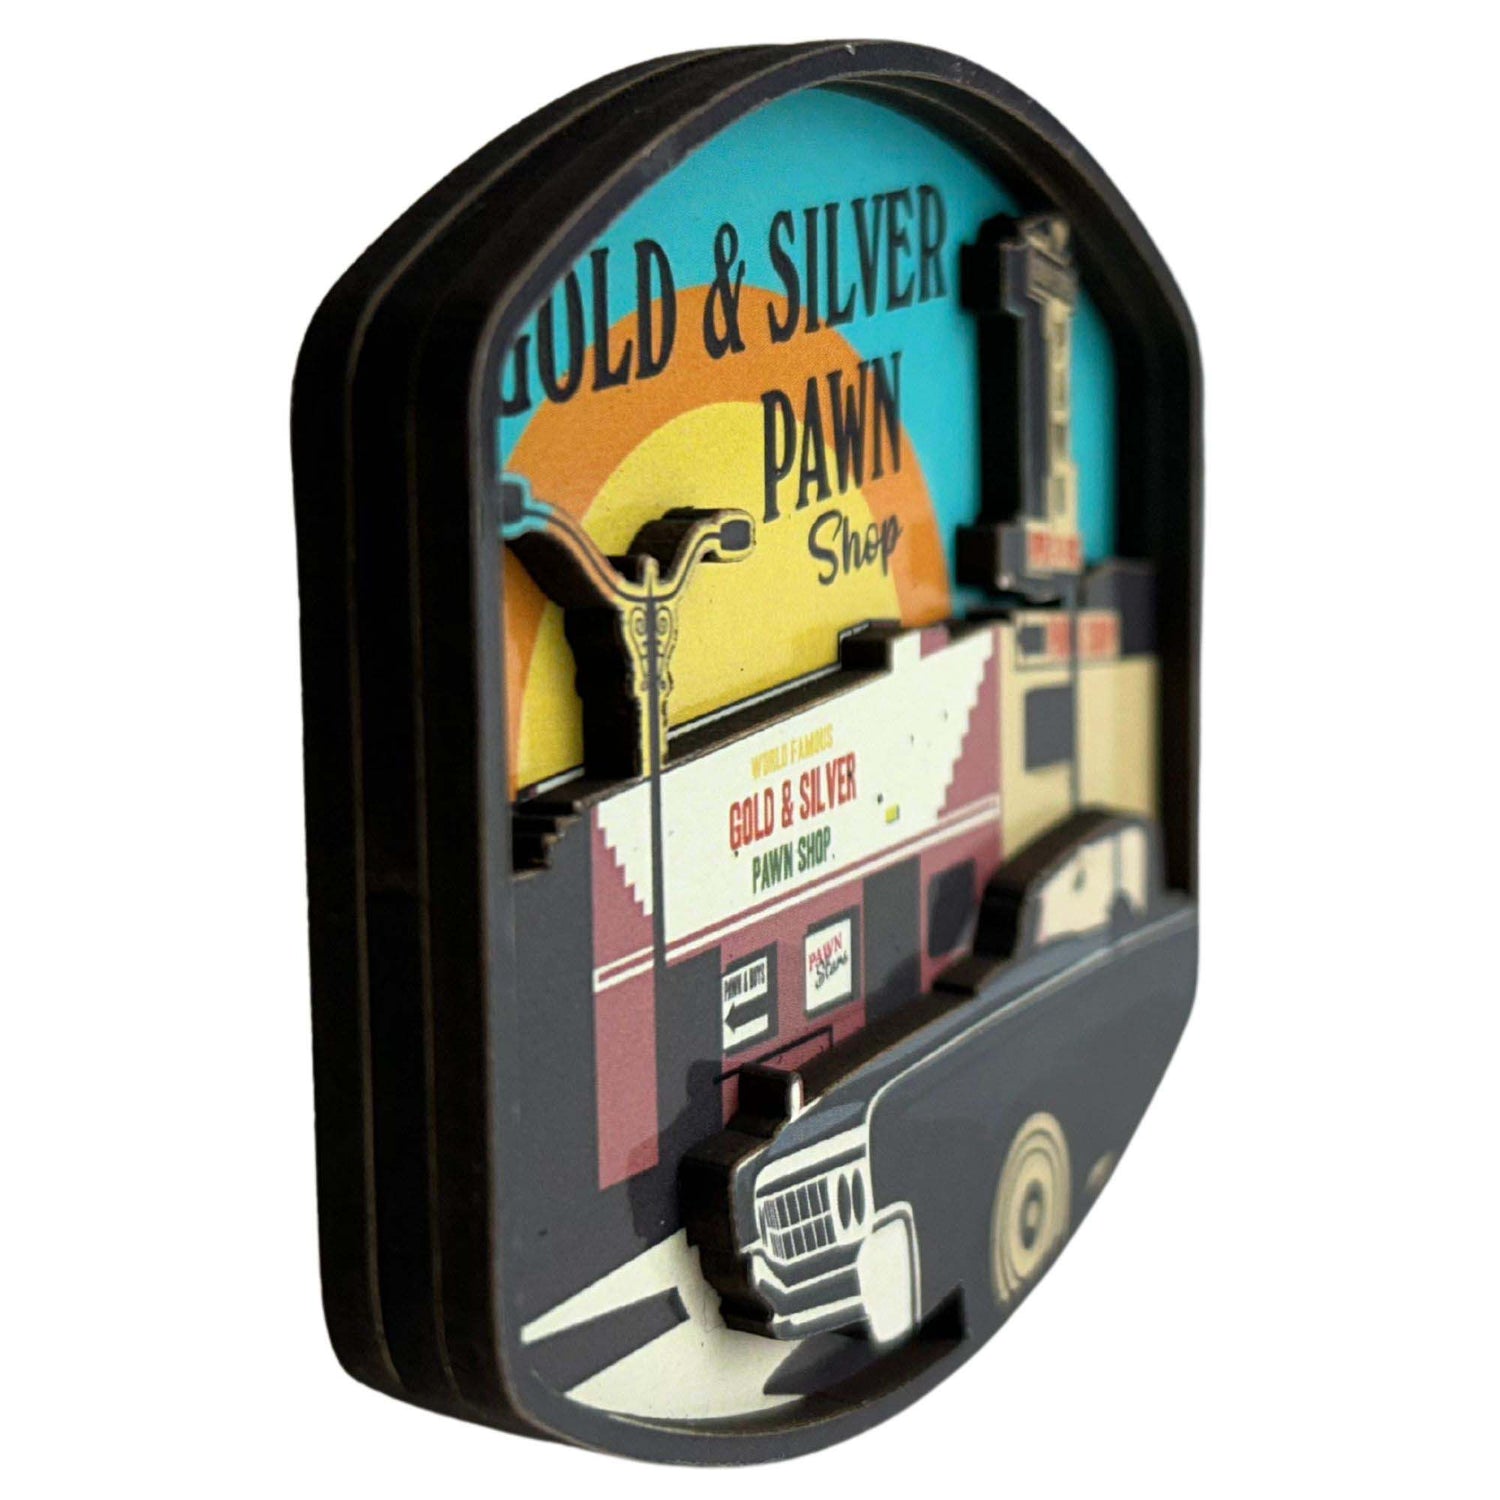 Gold & Silver Pawn Shop 3D Magnet Side View